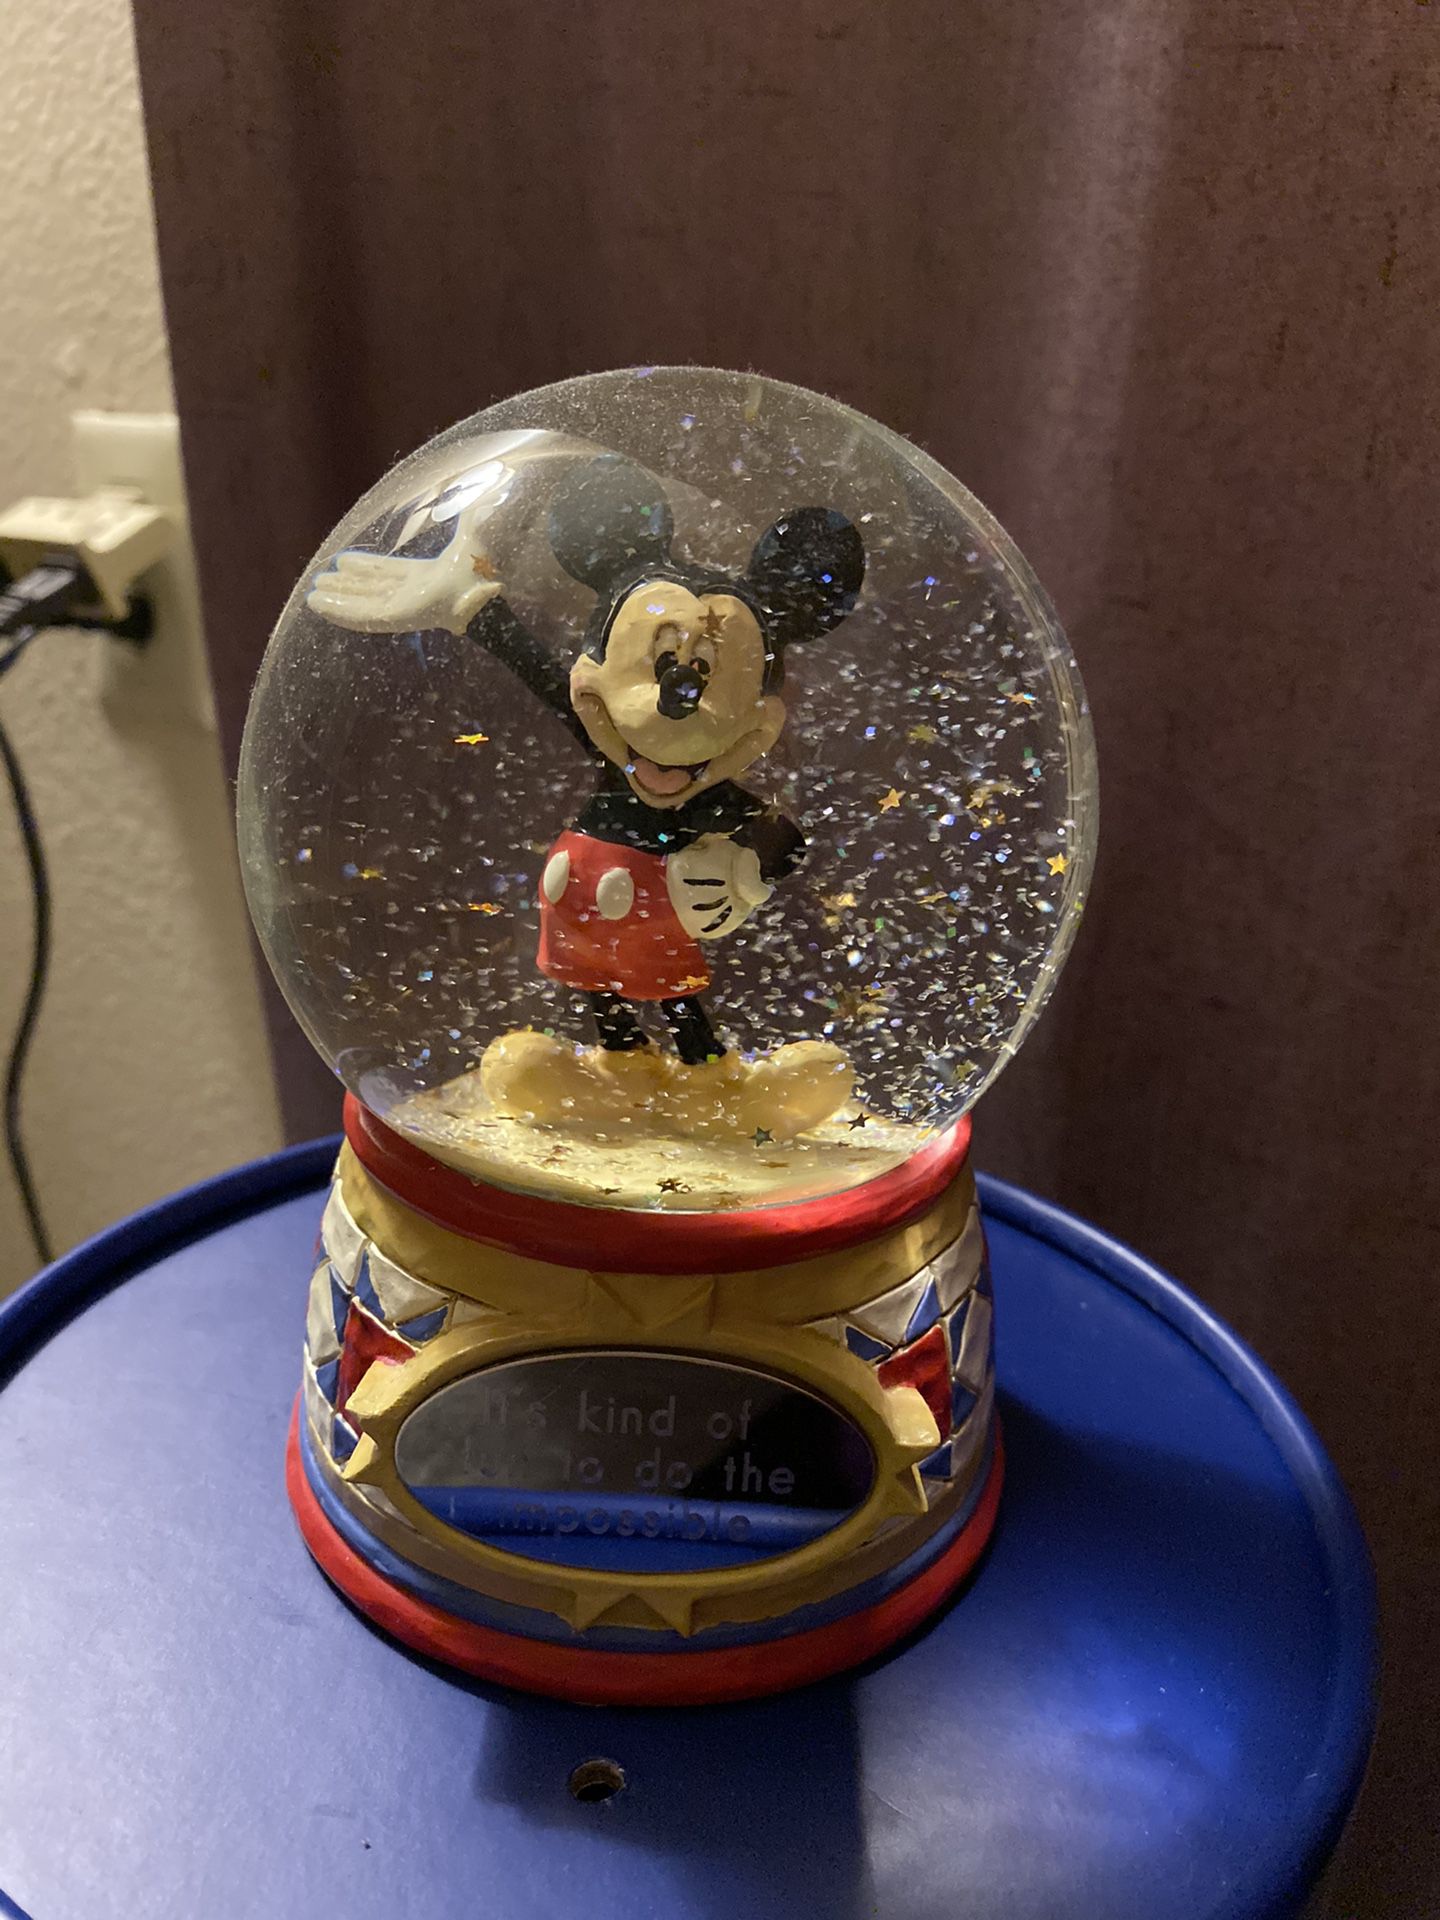 Disney Mickey Mouse snowglobe “It’s kind of fun to do the impossible”